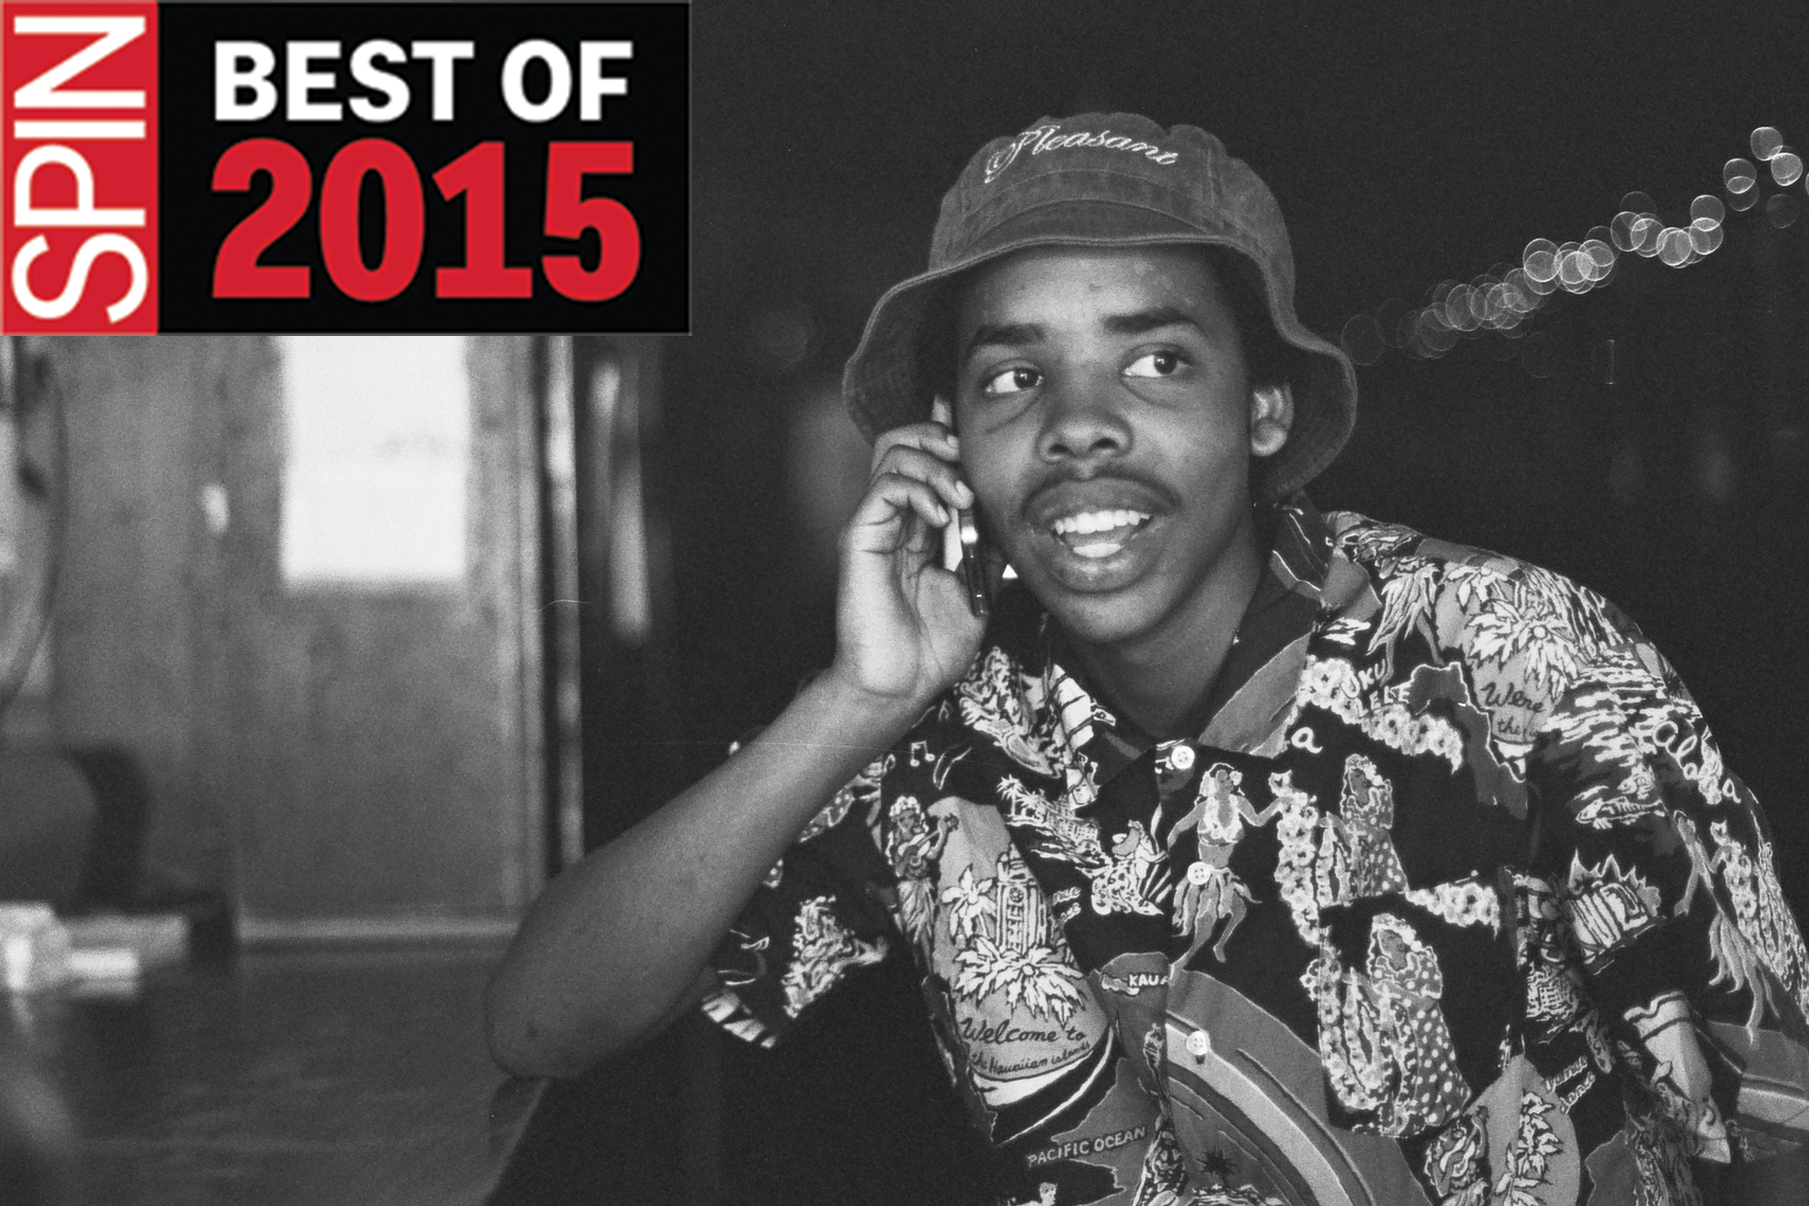 The 101 Best Albums of the 2010s